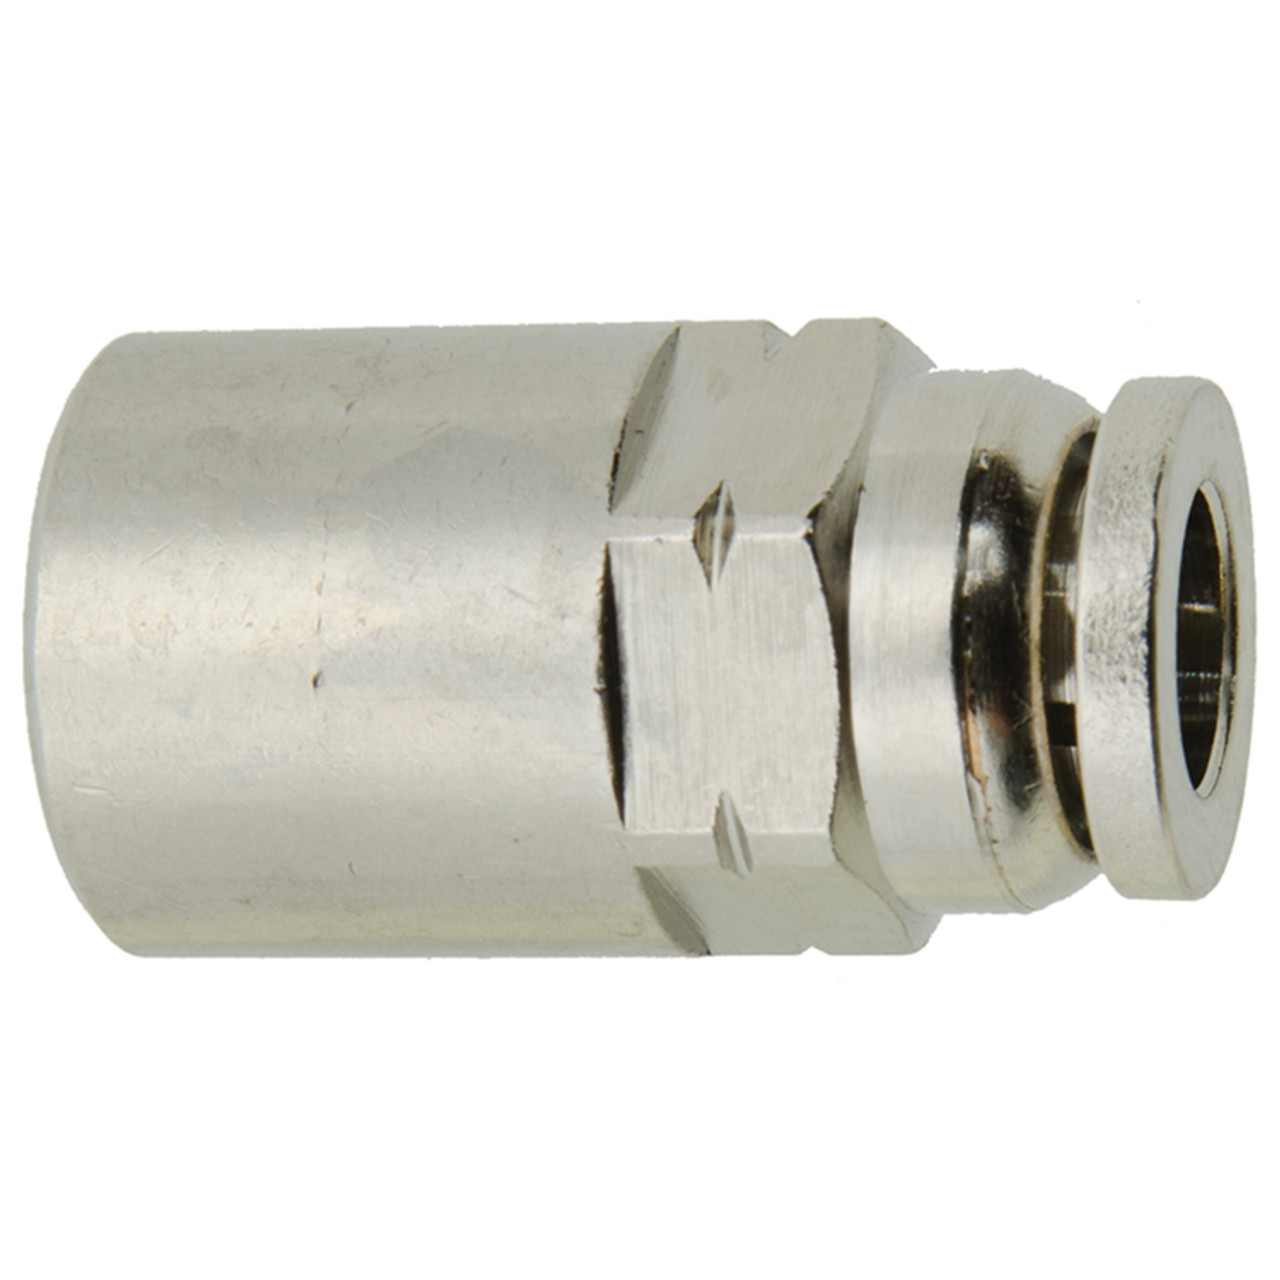 1/8 x 1/4" Nickel Plated Brass Female NPT - Push-To-Connect   G6008P-02-04